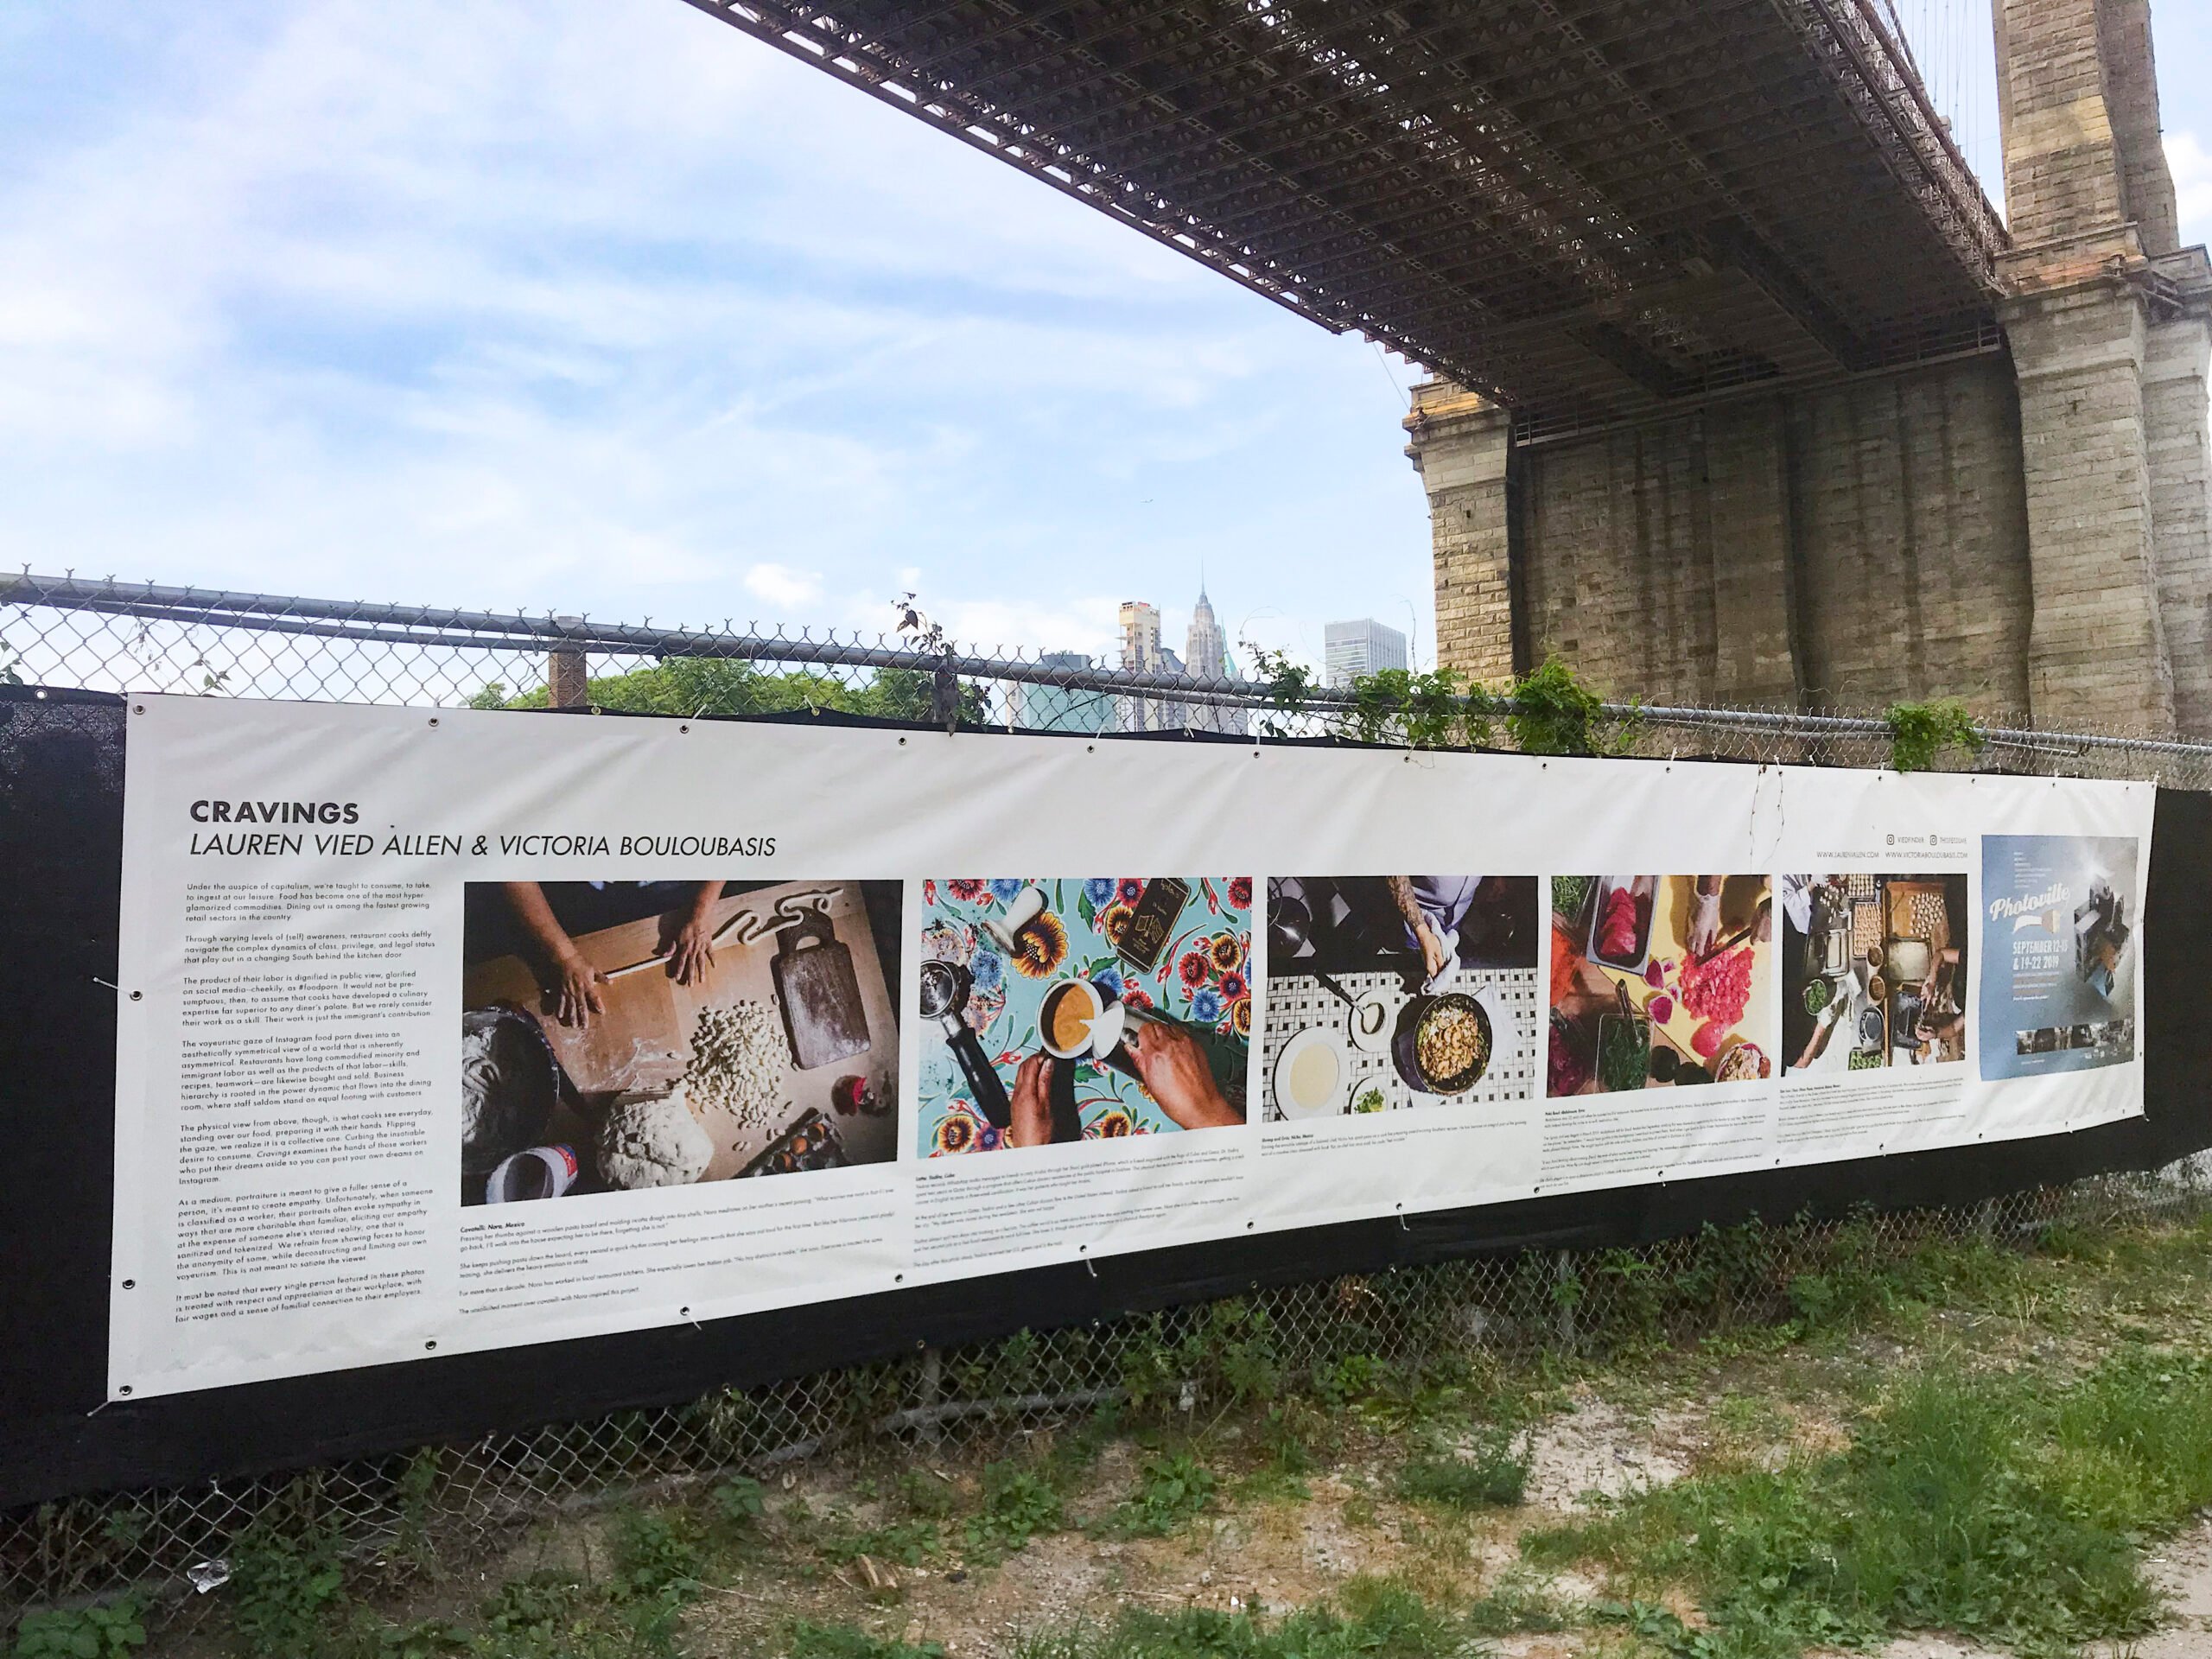 Lauren V. Allen's photos from CRAVINGS as shown on the Brooklyn Bridge display in a photo by Rachel Dennis